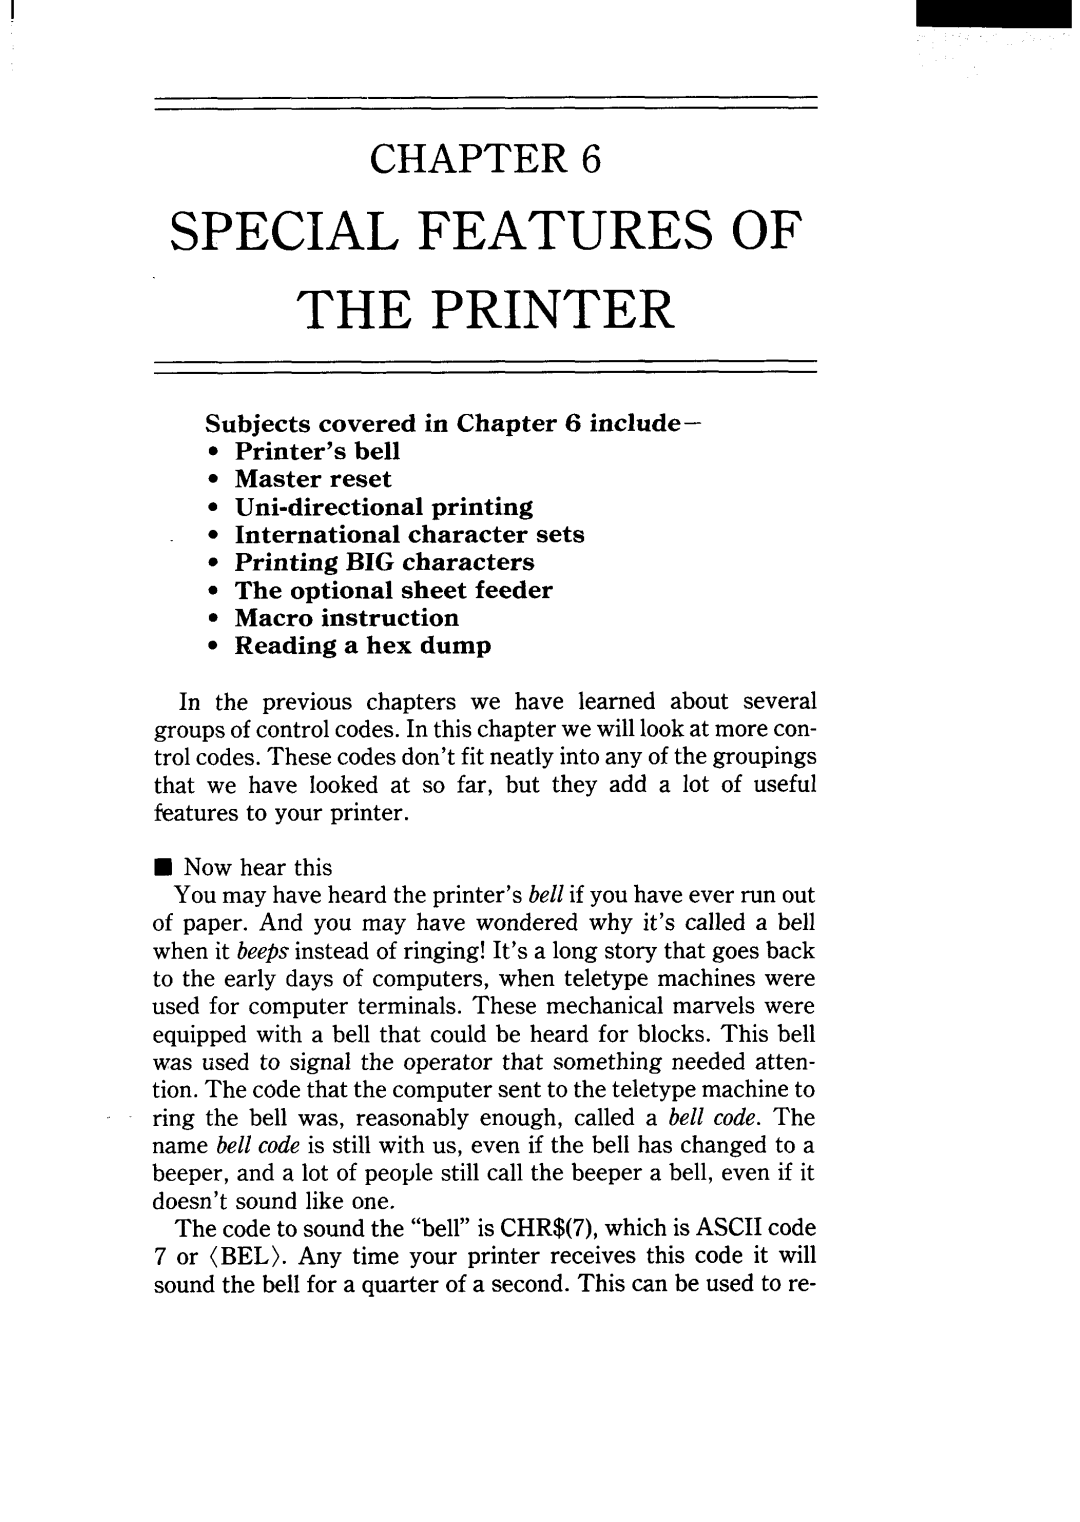 Star Micronics NX-15 Specialfeatures Of The Printer, Chapter, Subjectscoveredin inckde Printer’s bell Master reset 